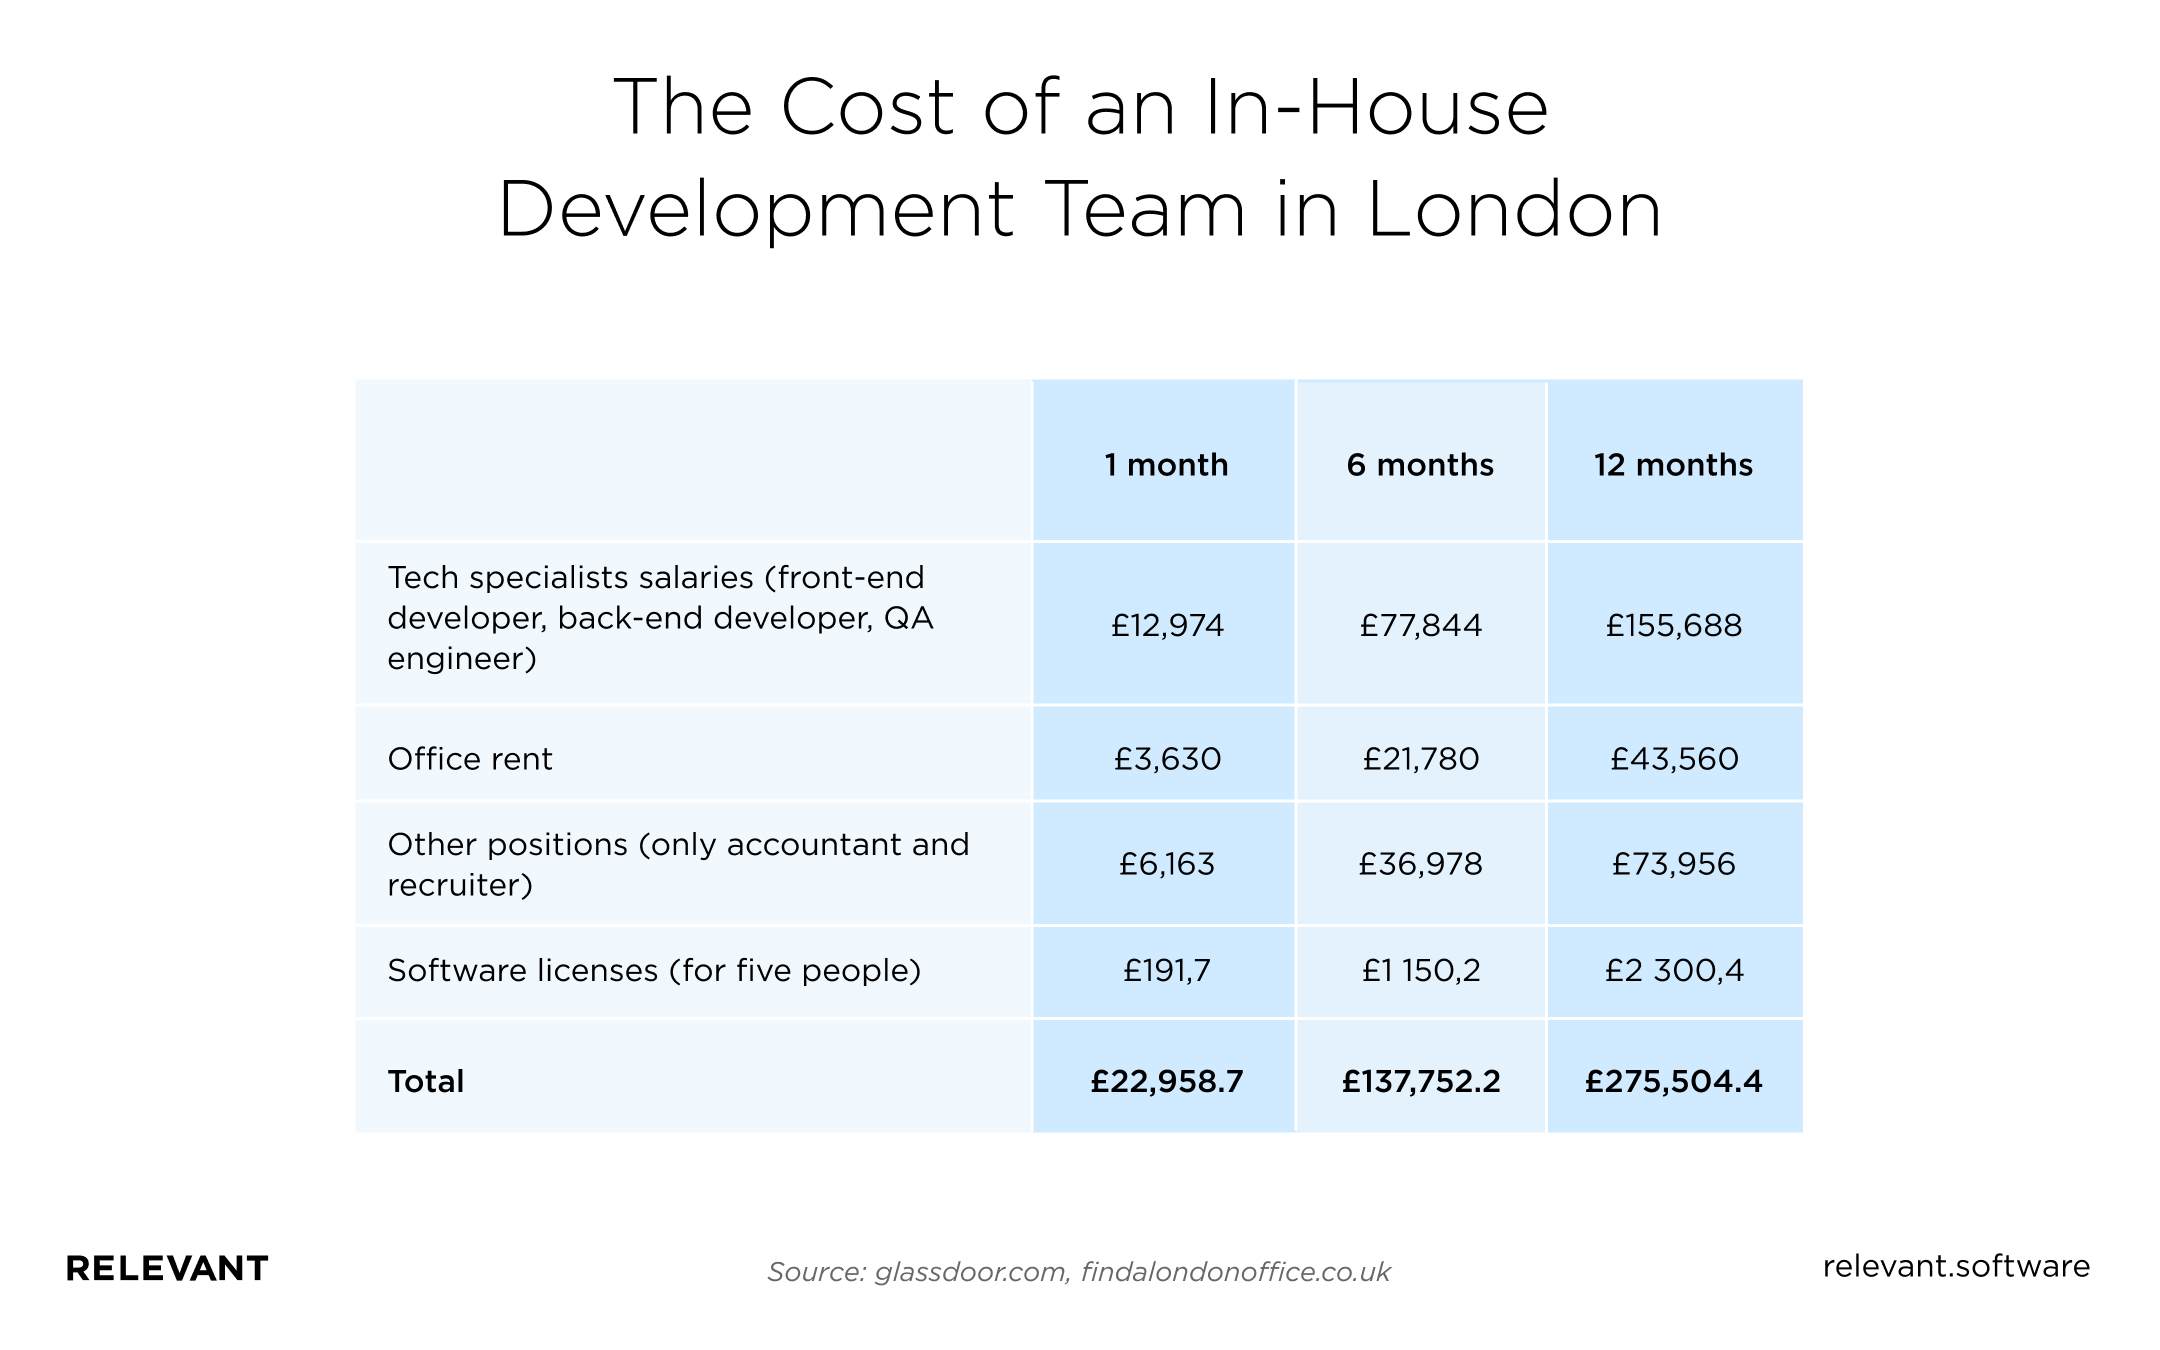 The Cost of an In-House Development Team in London